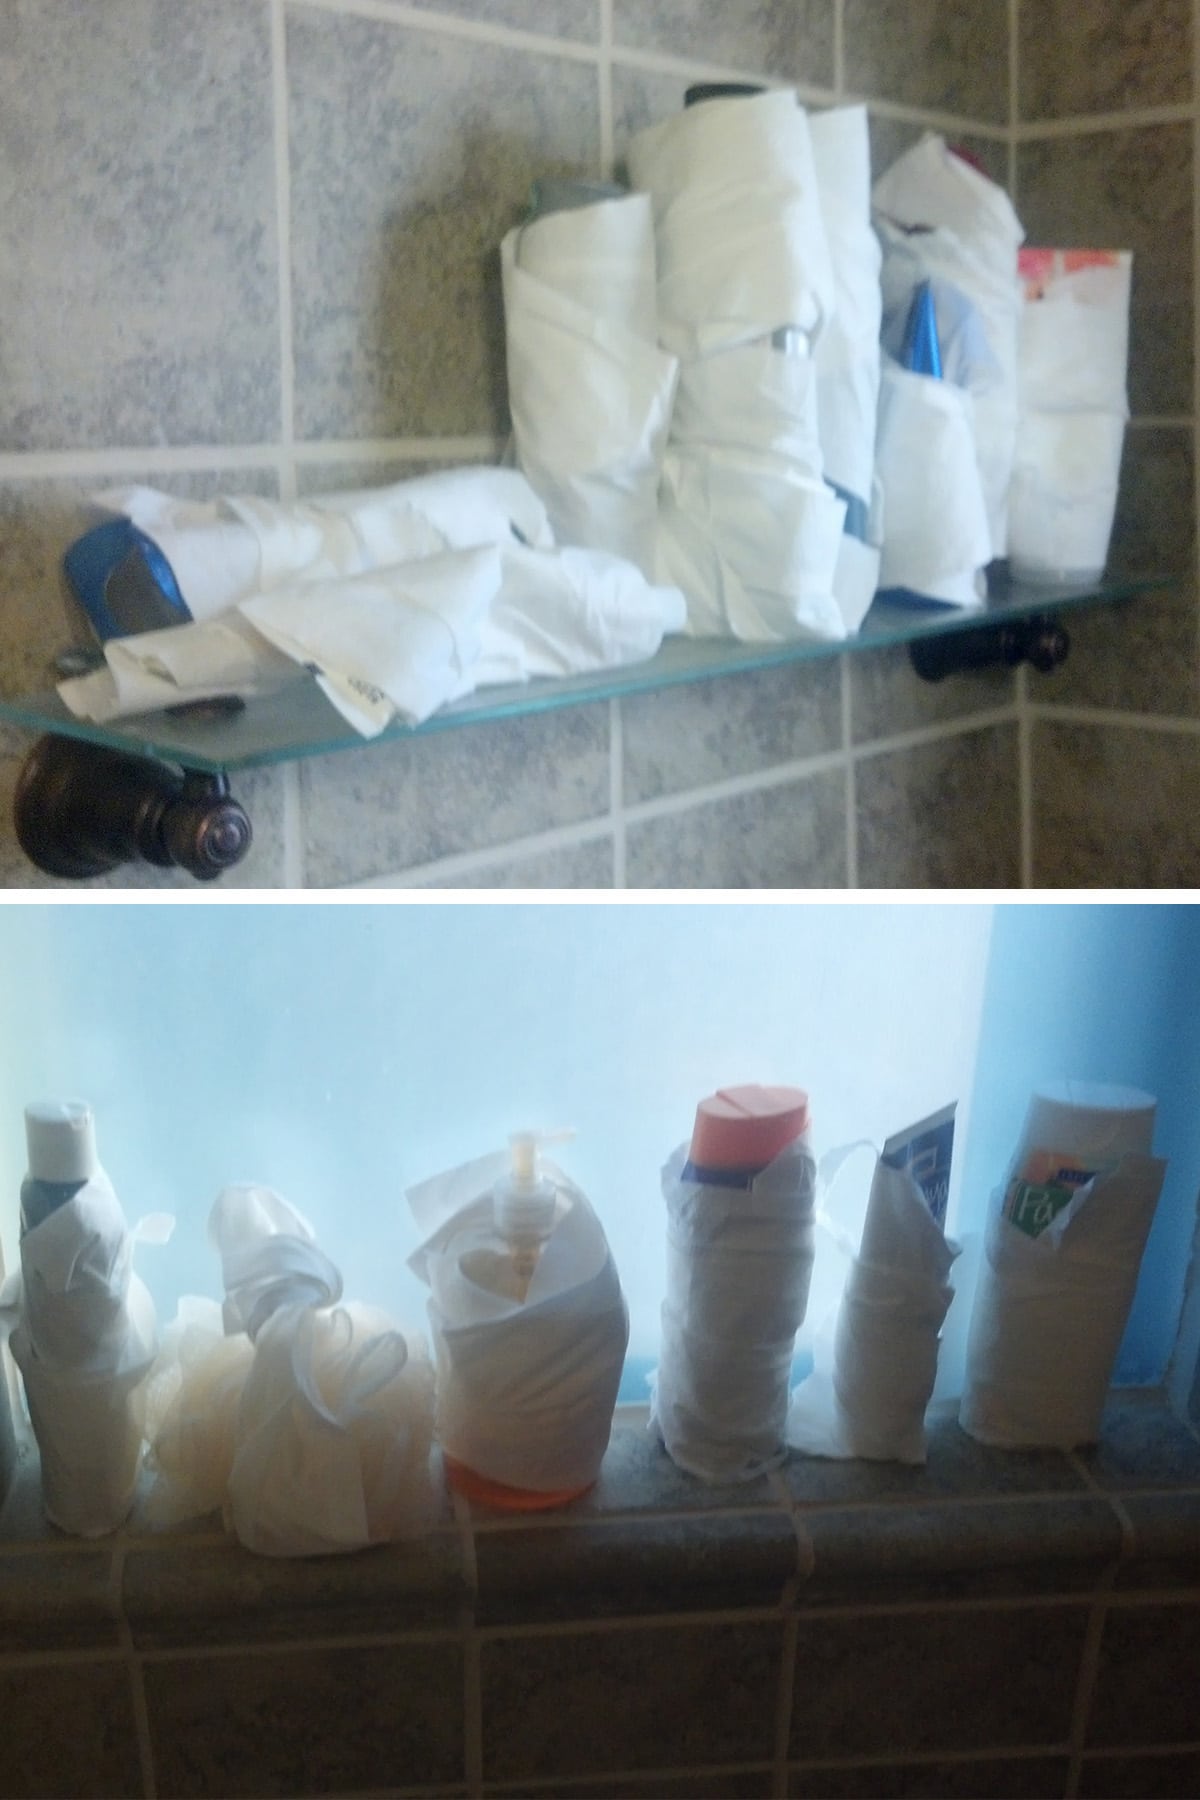 two photos of shower items wrapped up, mummy style, in toilet paper.